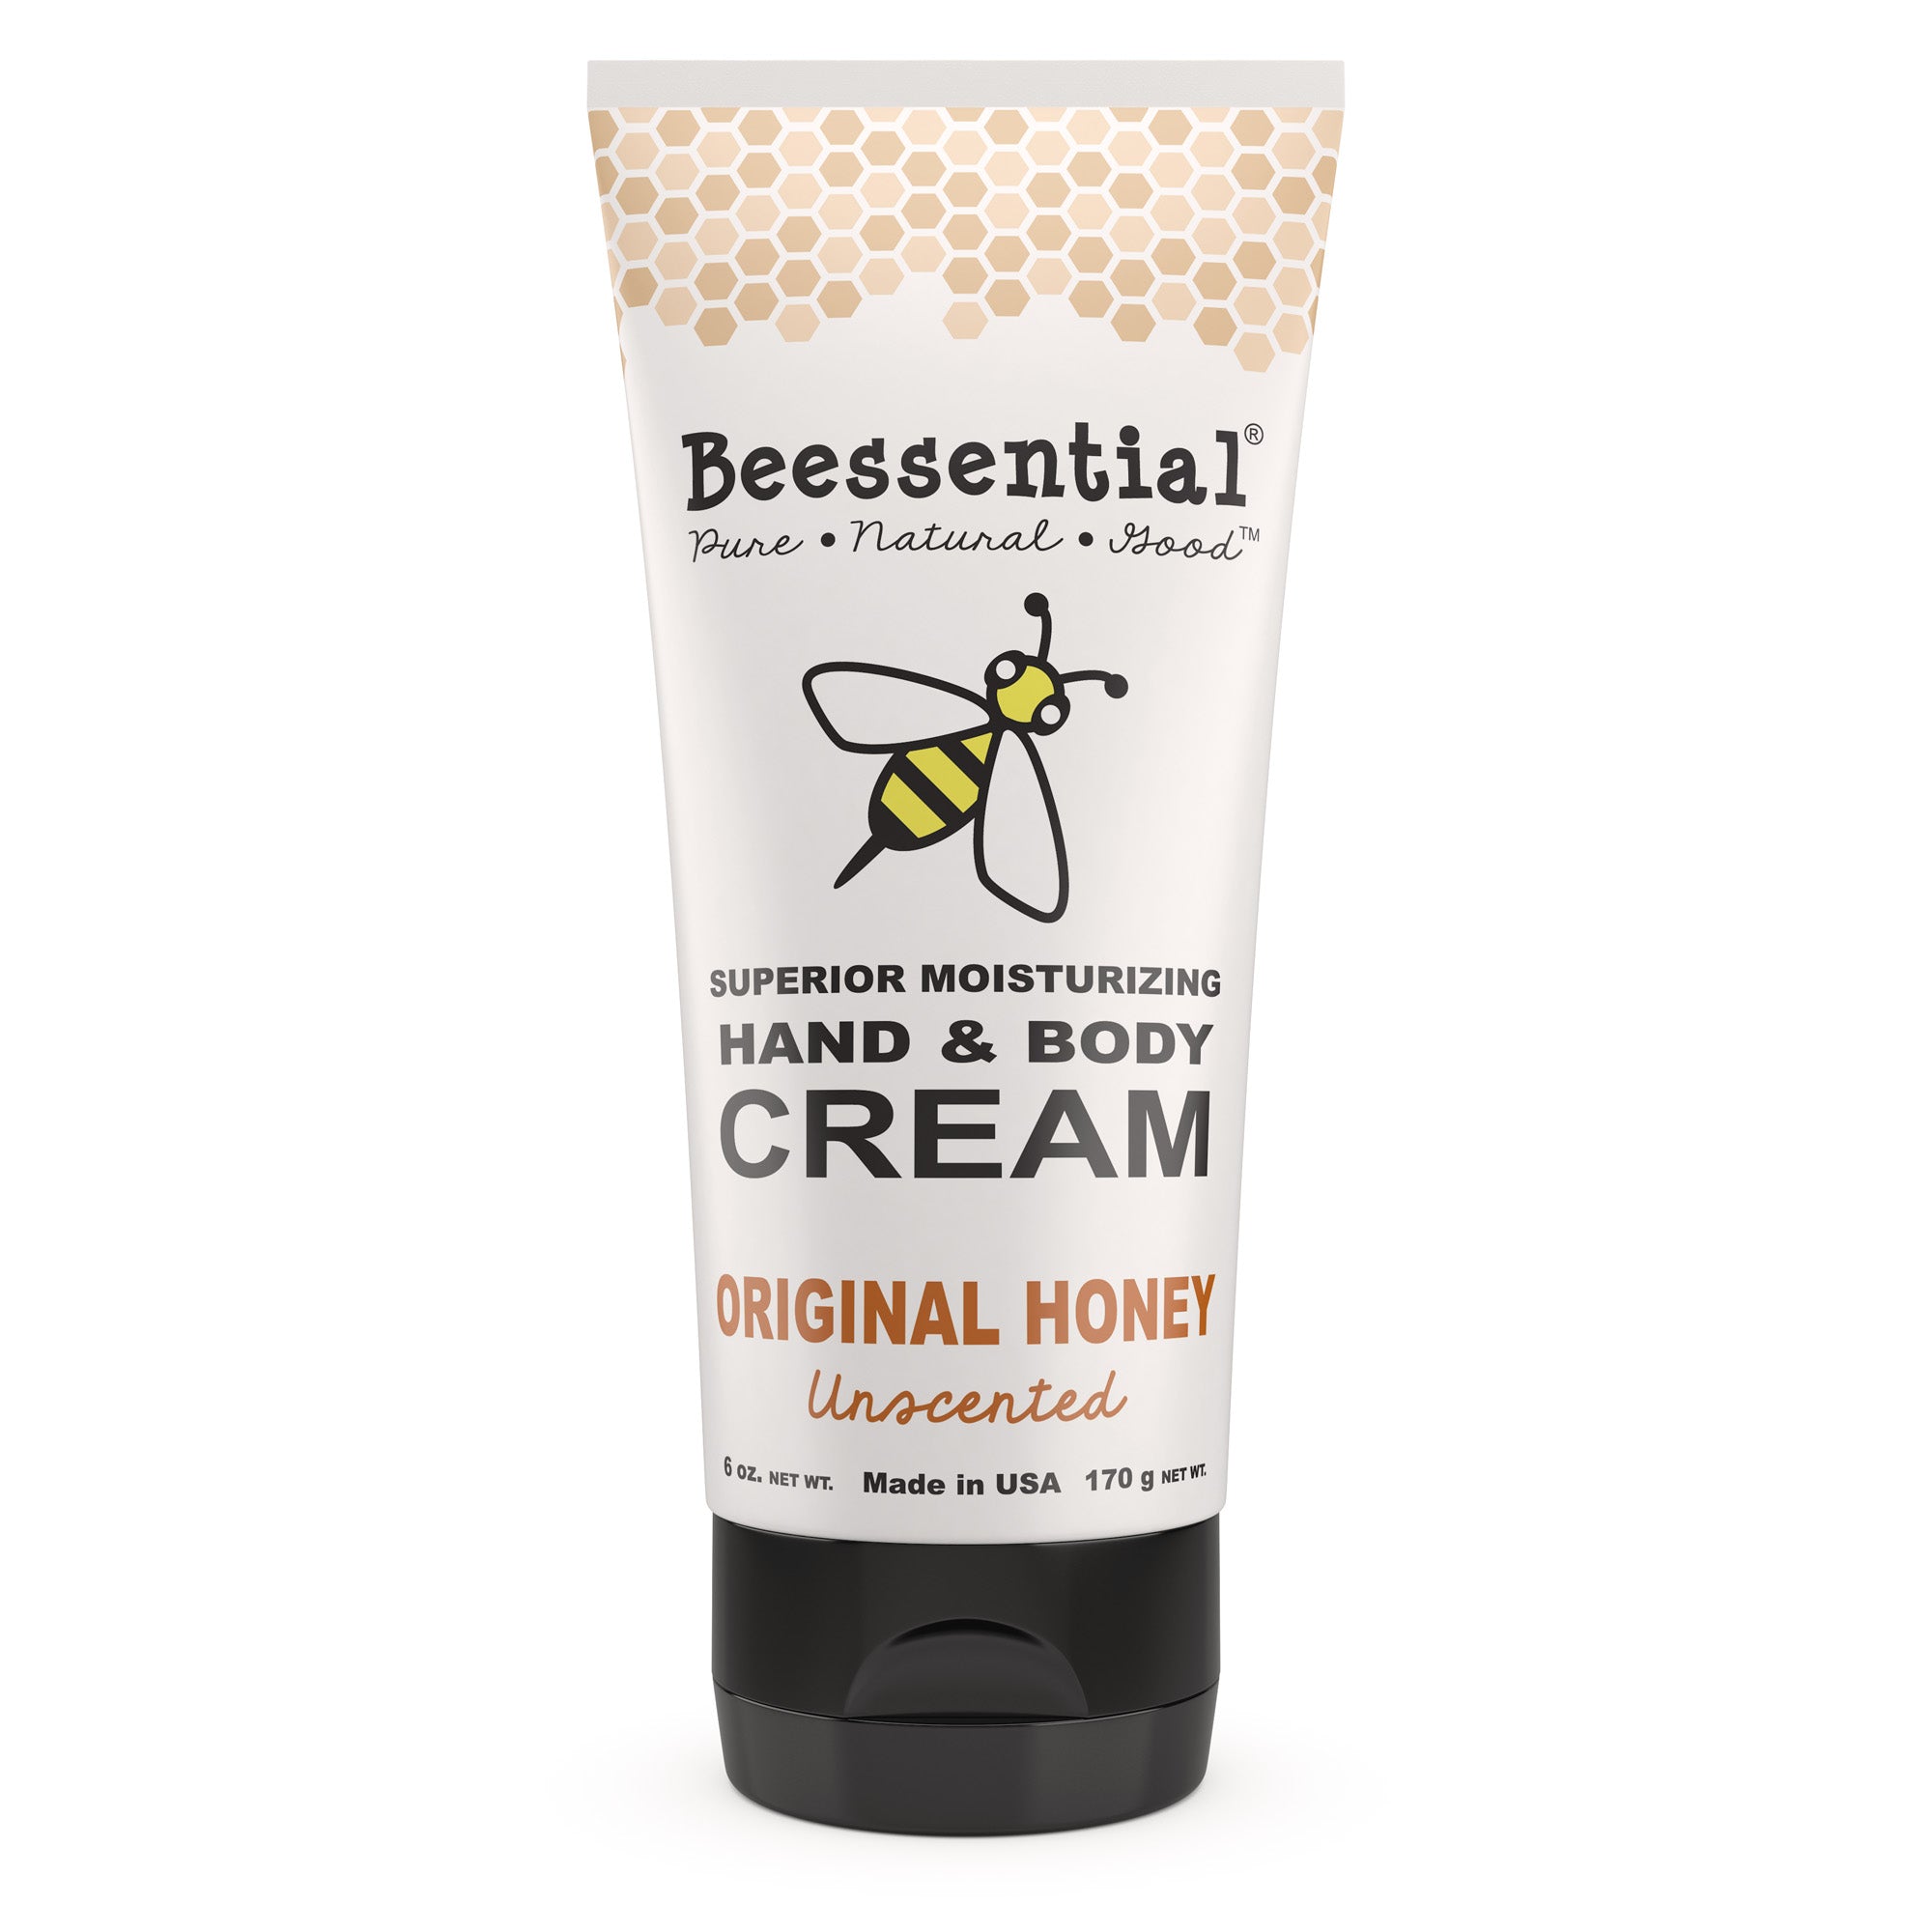 Beessential Cream includes honey, cupuacu butter, beeswax, and silk protein to lock in moisture.